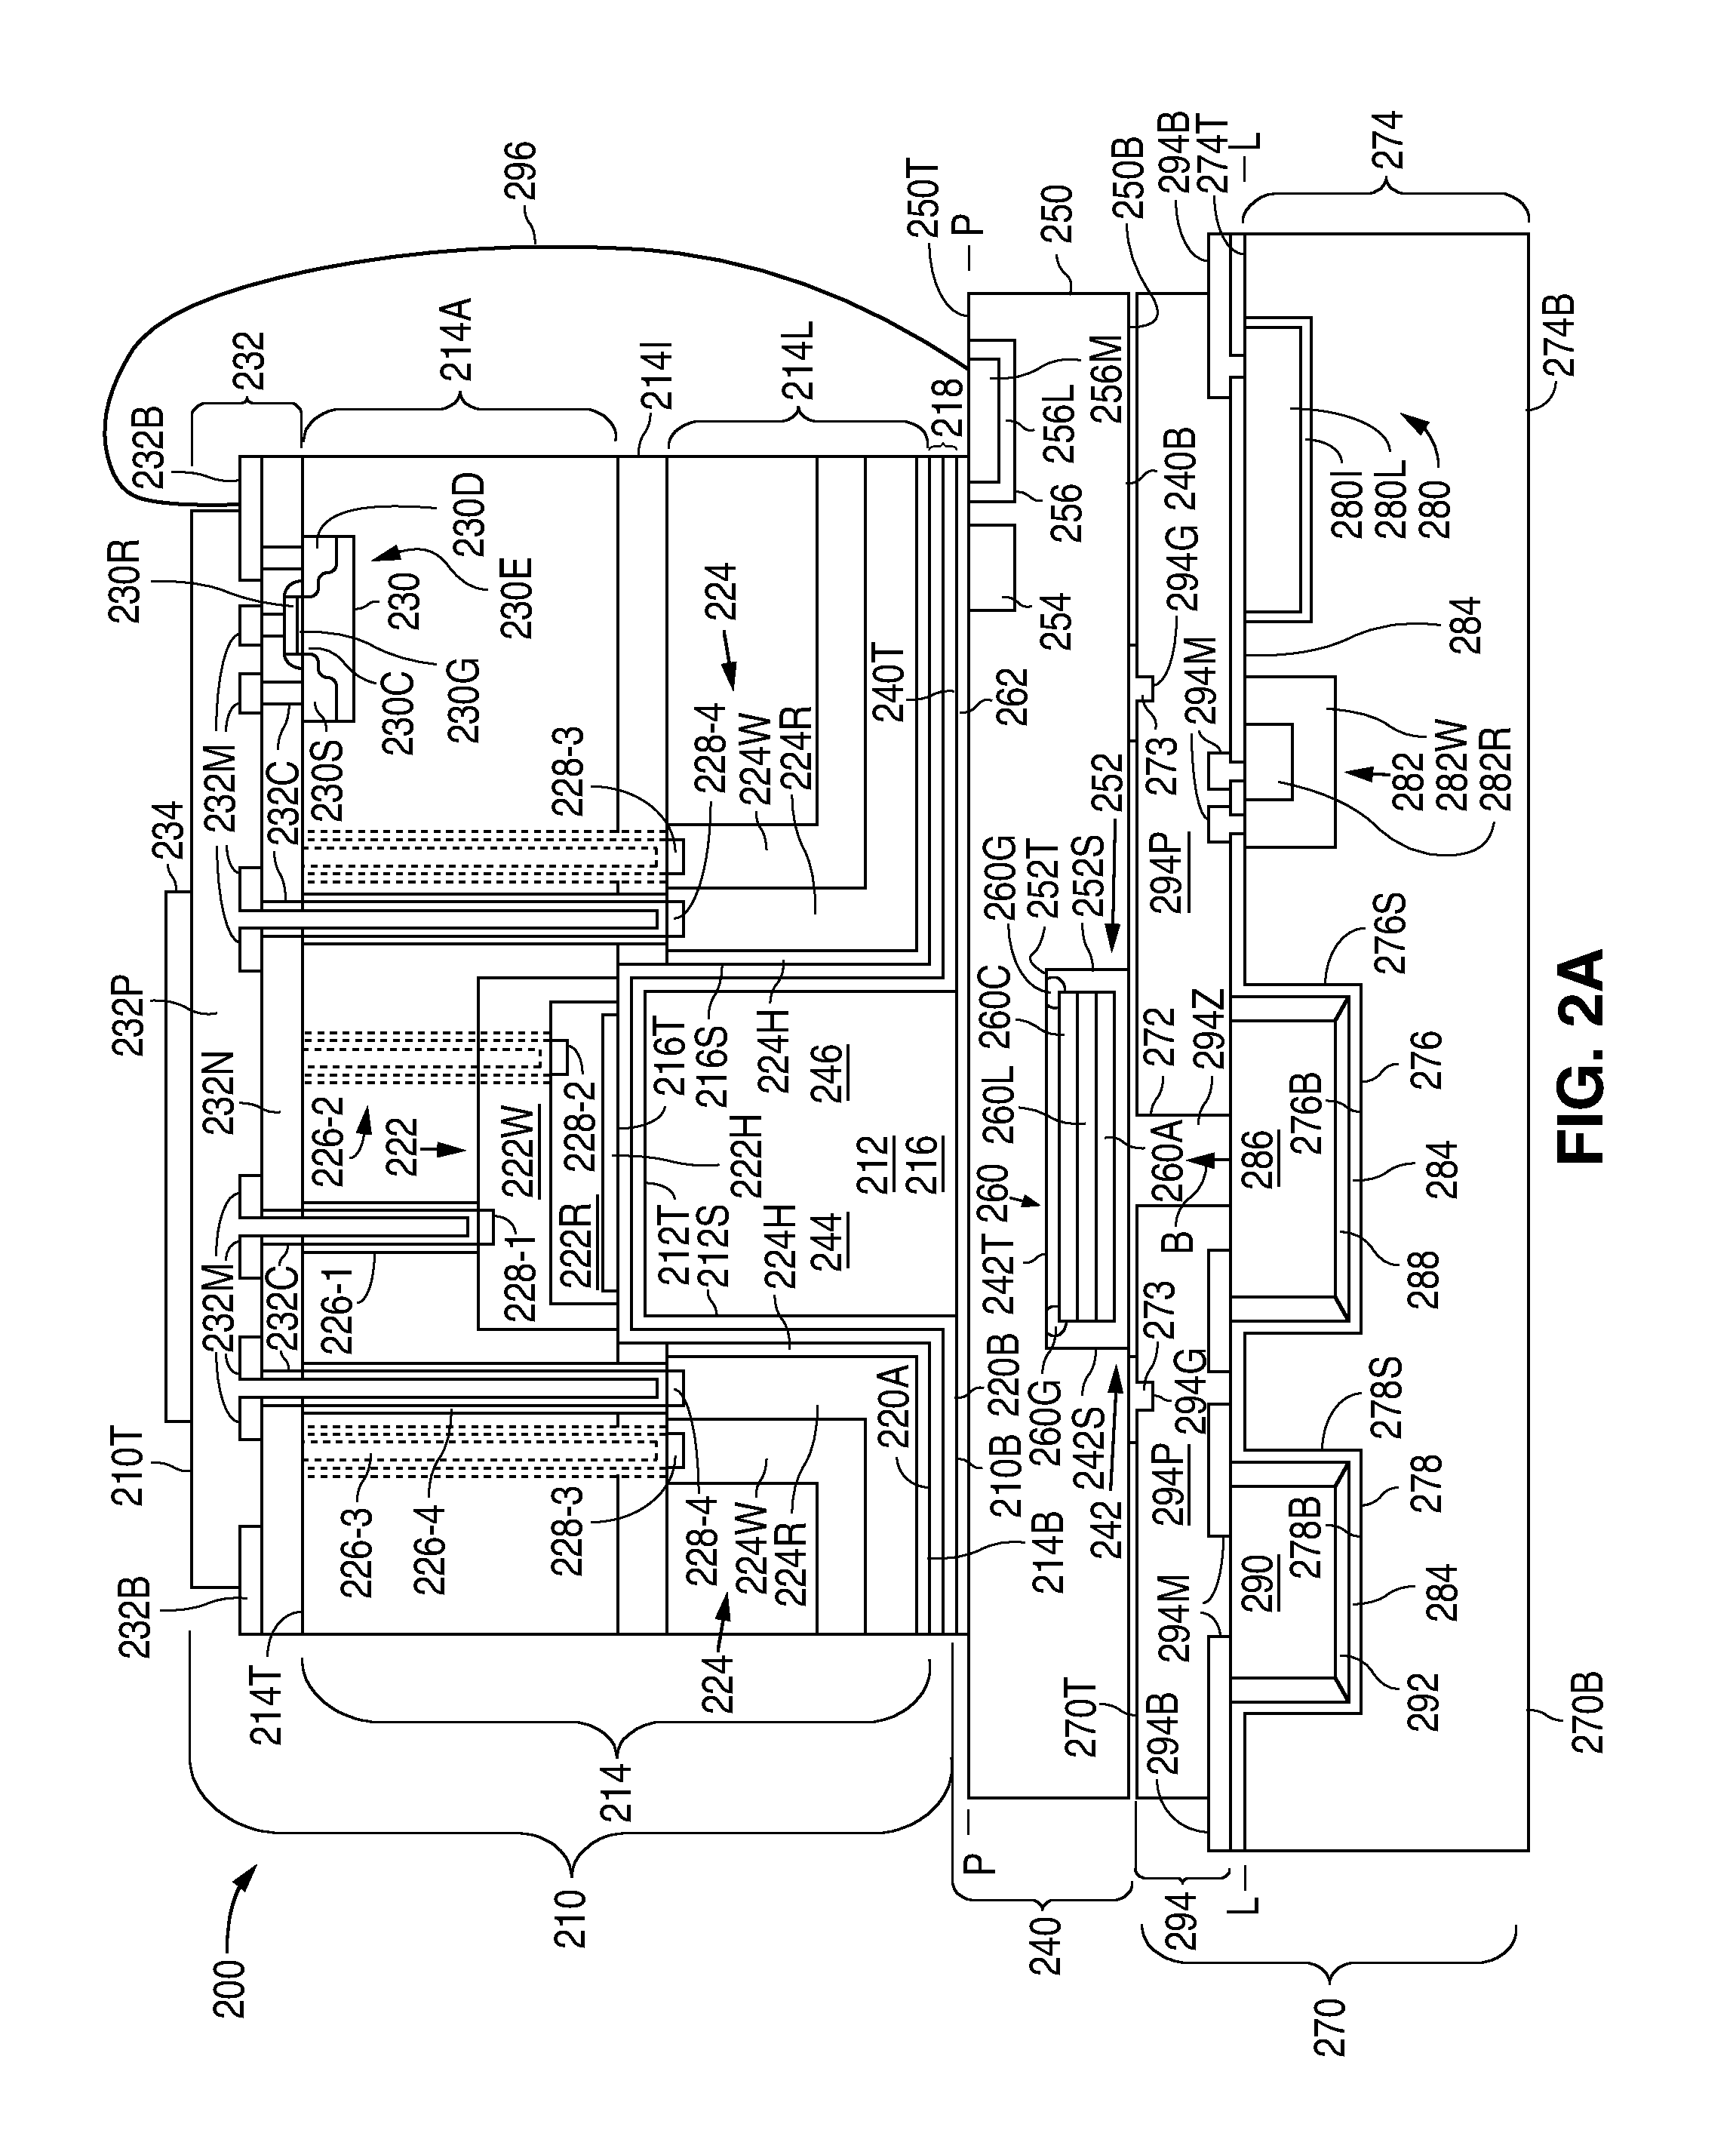 Die-Sized Atomic Magnetometer and Method of Forming the Magnetometer